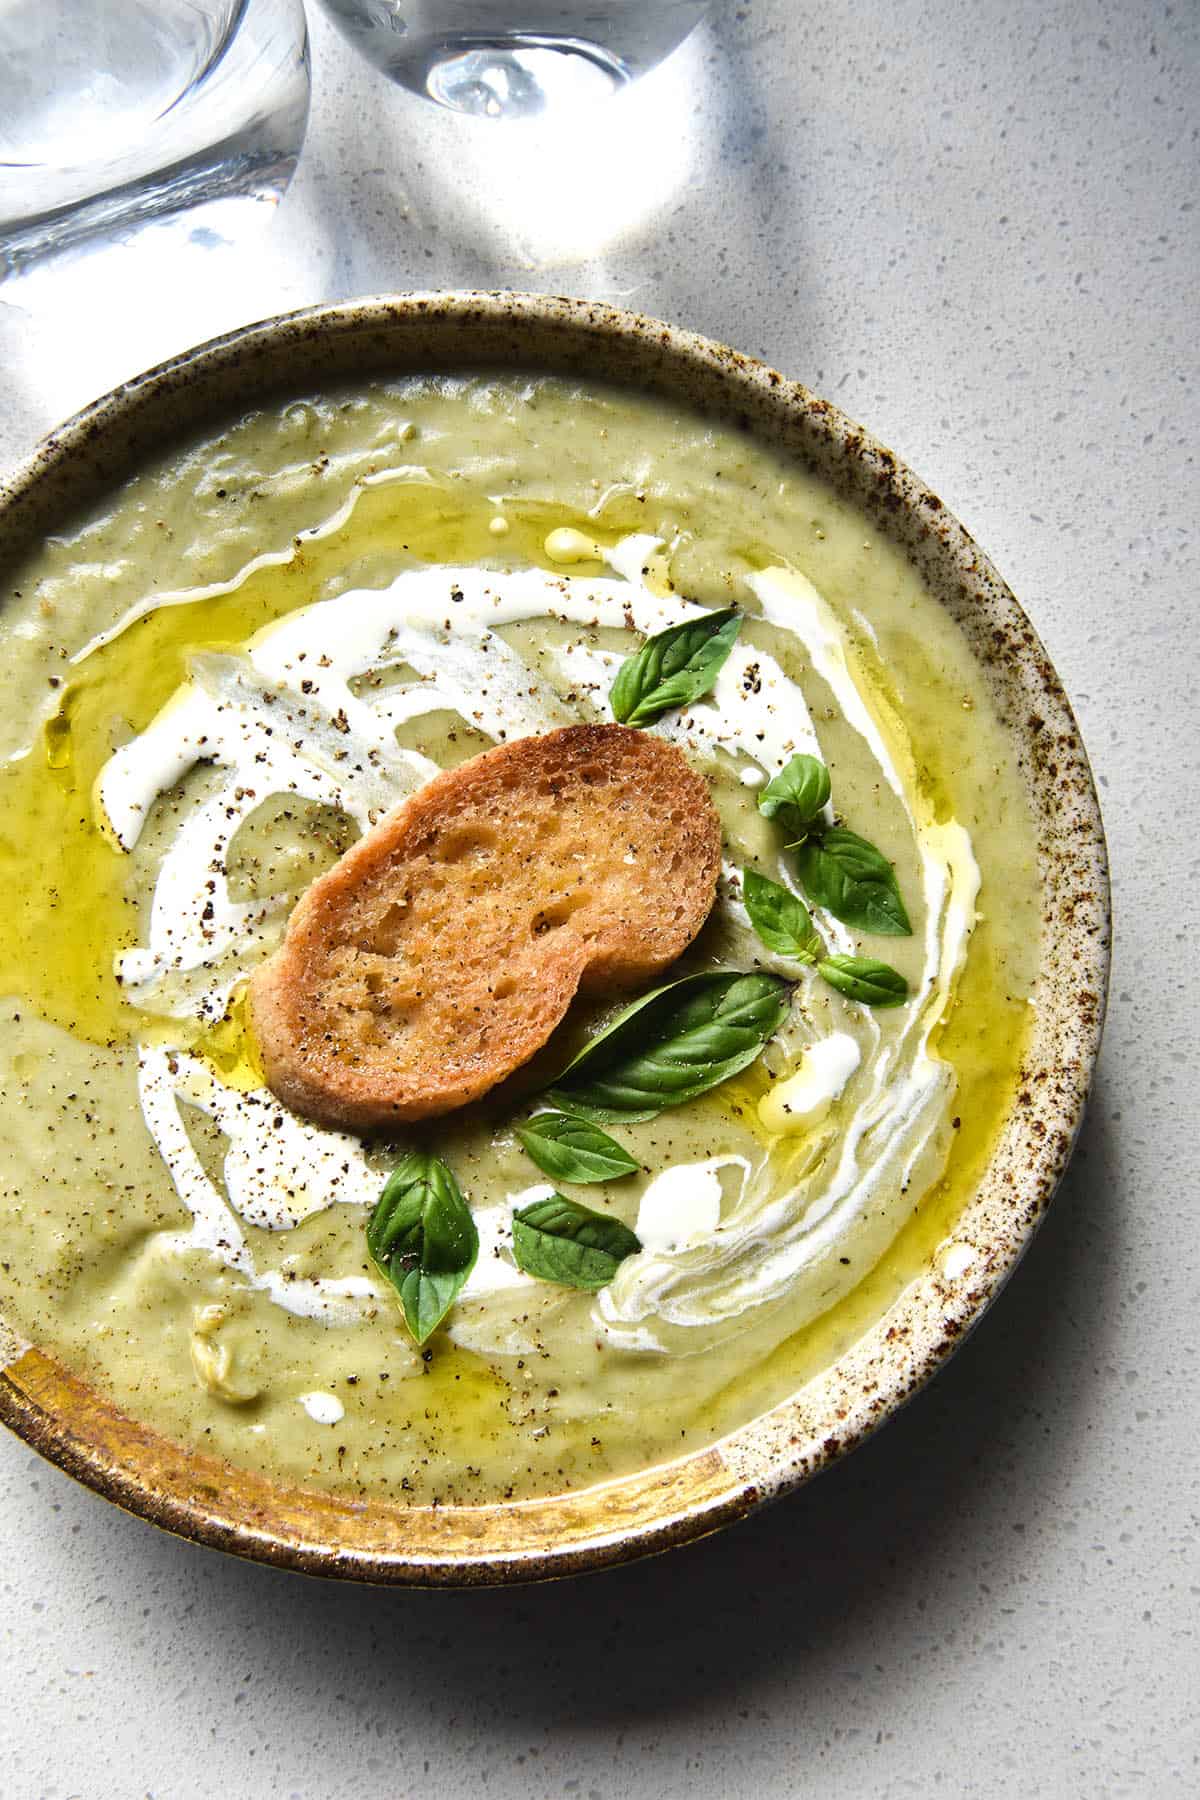 An aerial view of a speckled ceramic bowl of FODMAP friendly leek and potato soup. The soup is a light green because it uses leek greens to keep it FODMAP friendly. It is topped with a swirl of cream, truffle oil, a gluten free crouton, grilled haloumi and basil leaves.